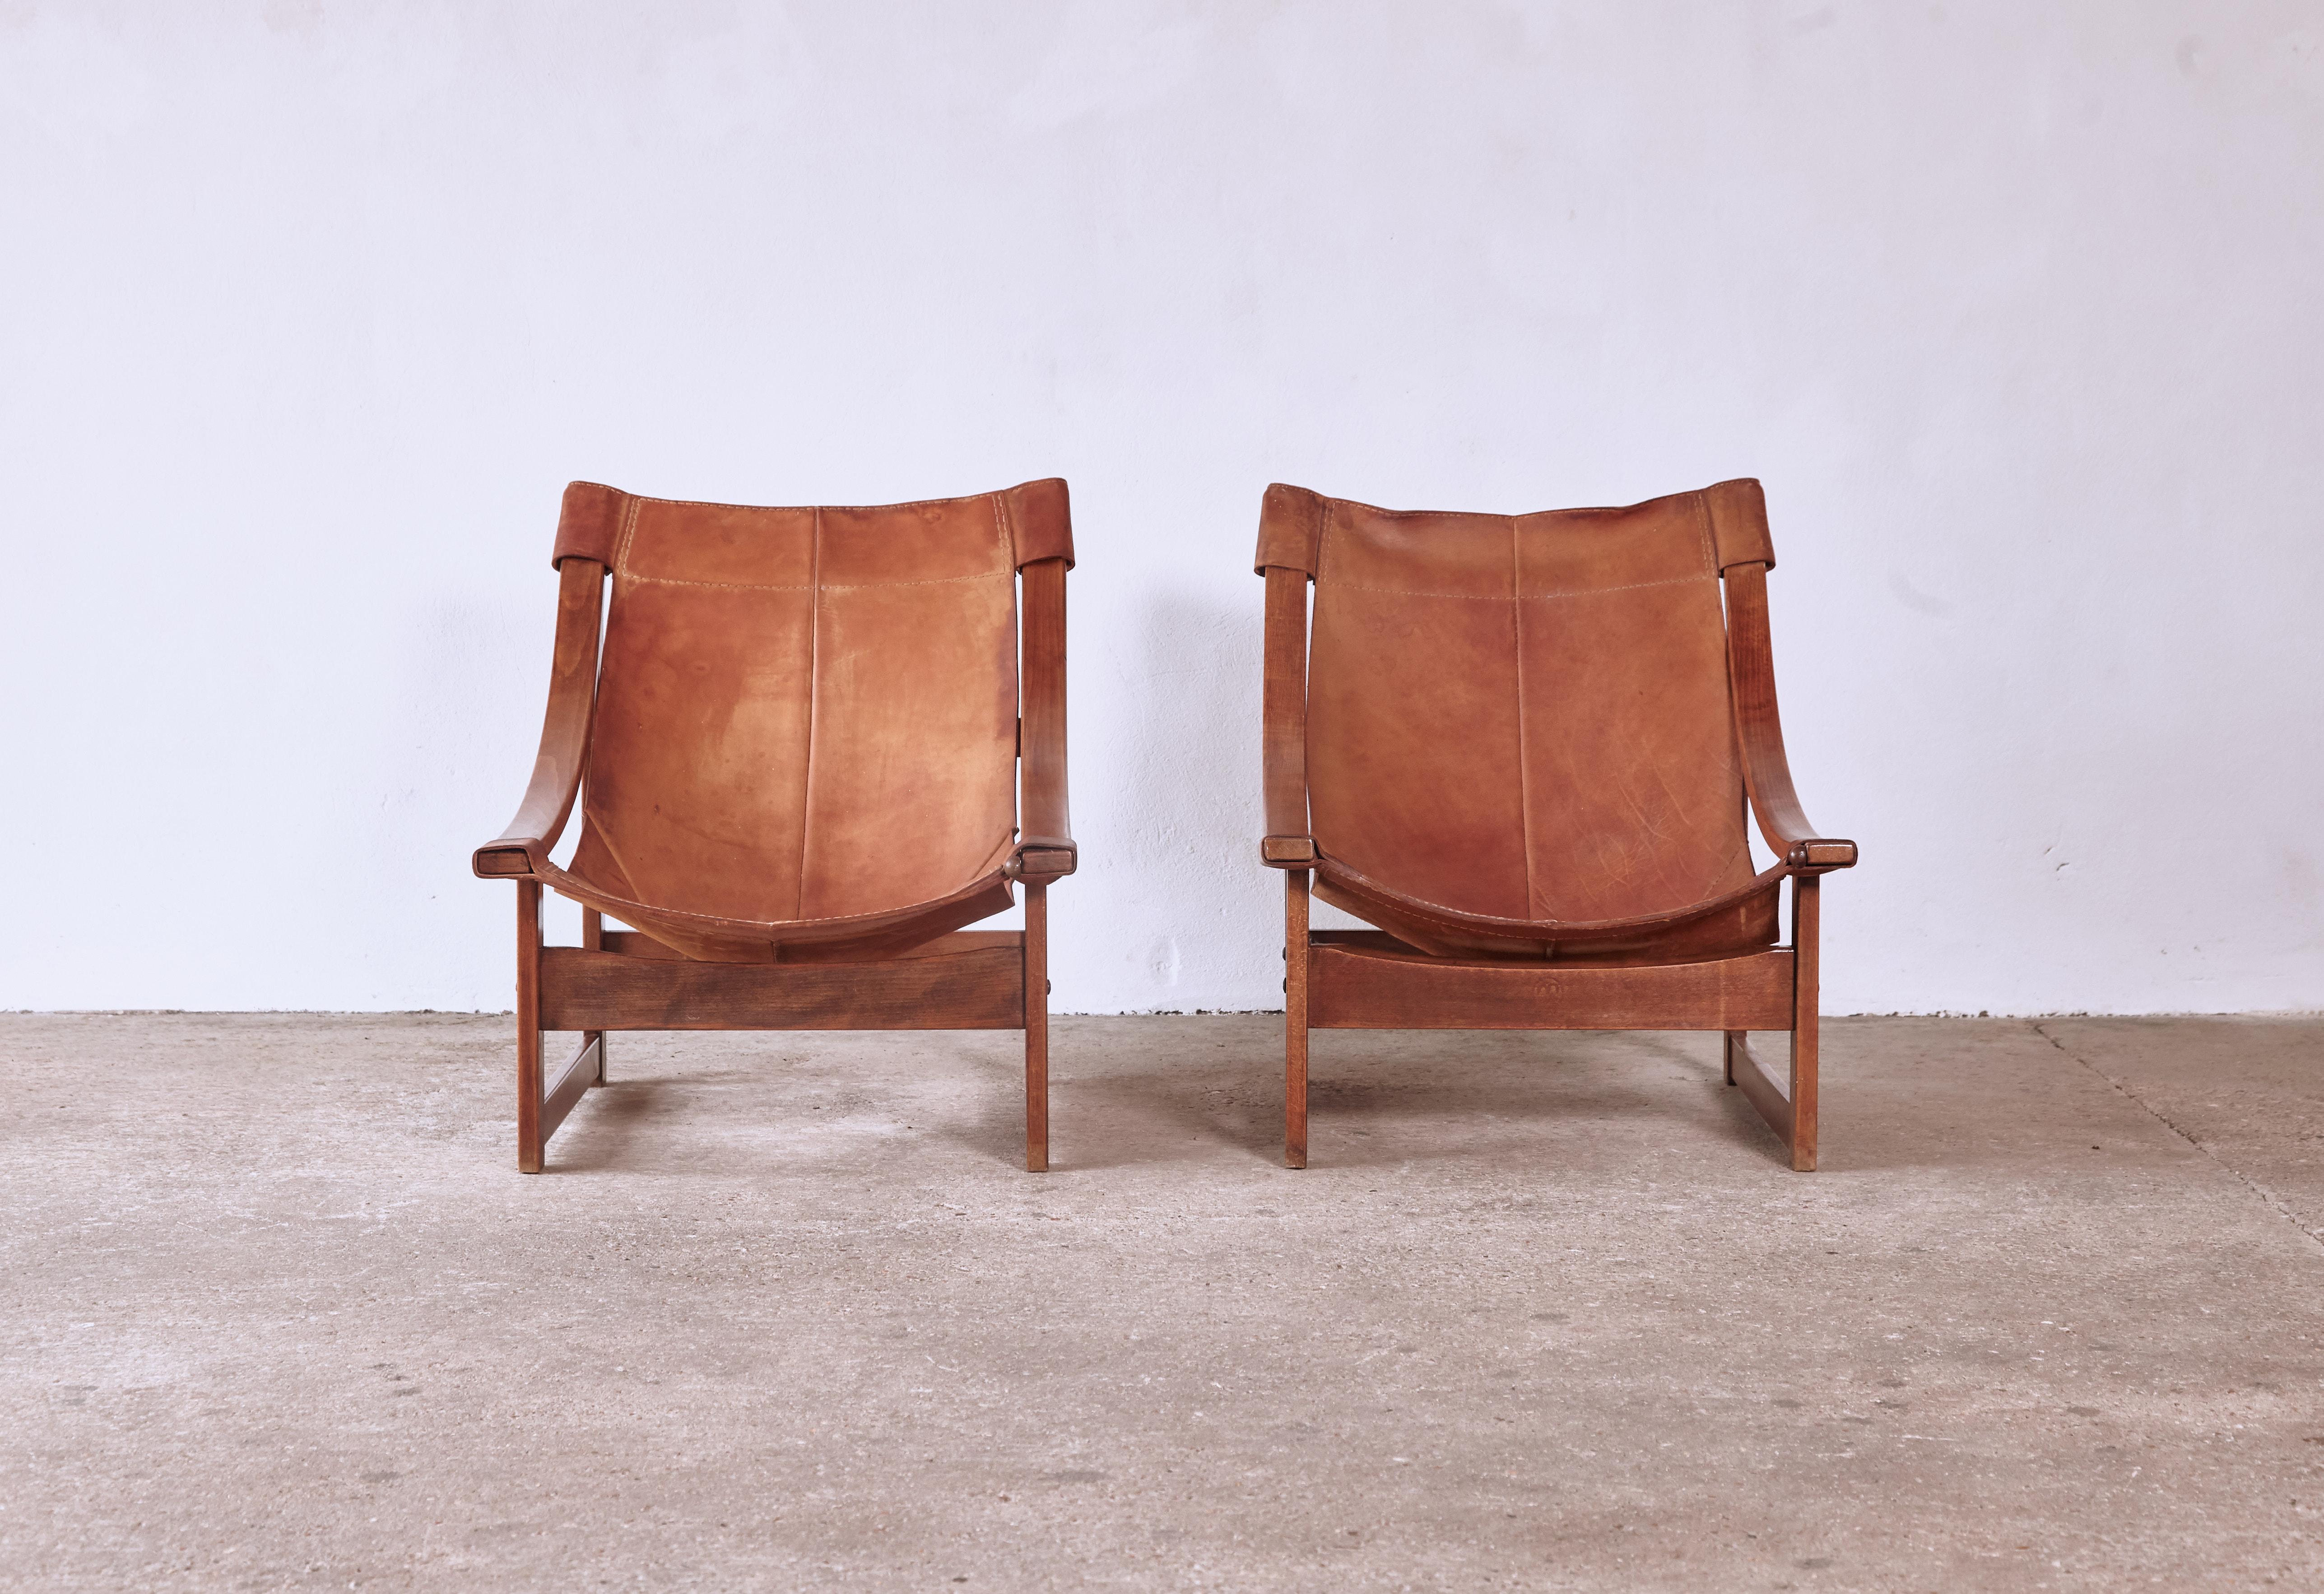 Rare Vicente Sanchez Pablos Spanish Lounge Chairs, Walnut and Leather, 1960s 3